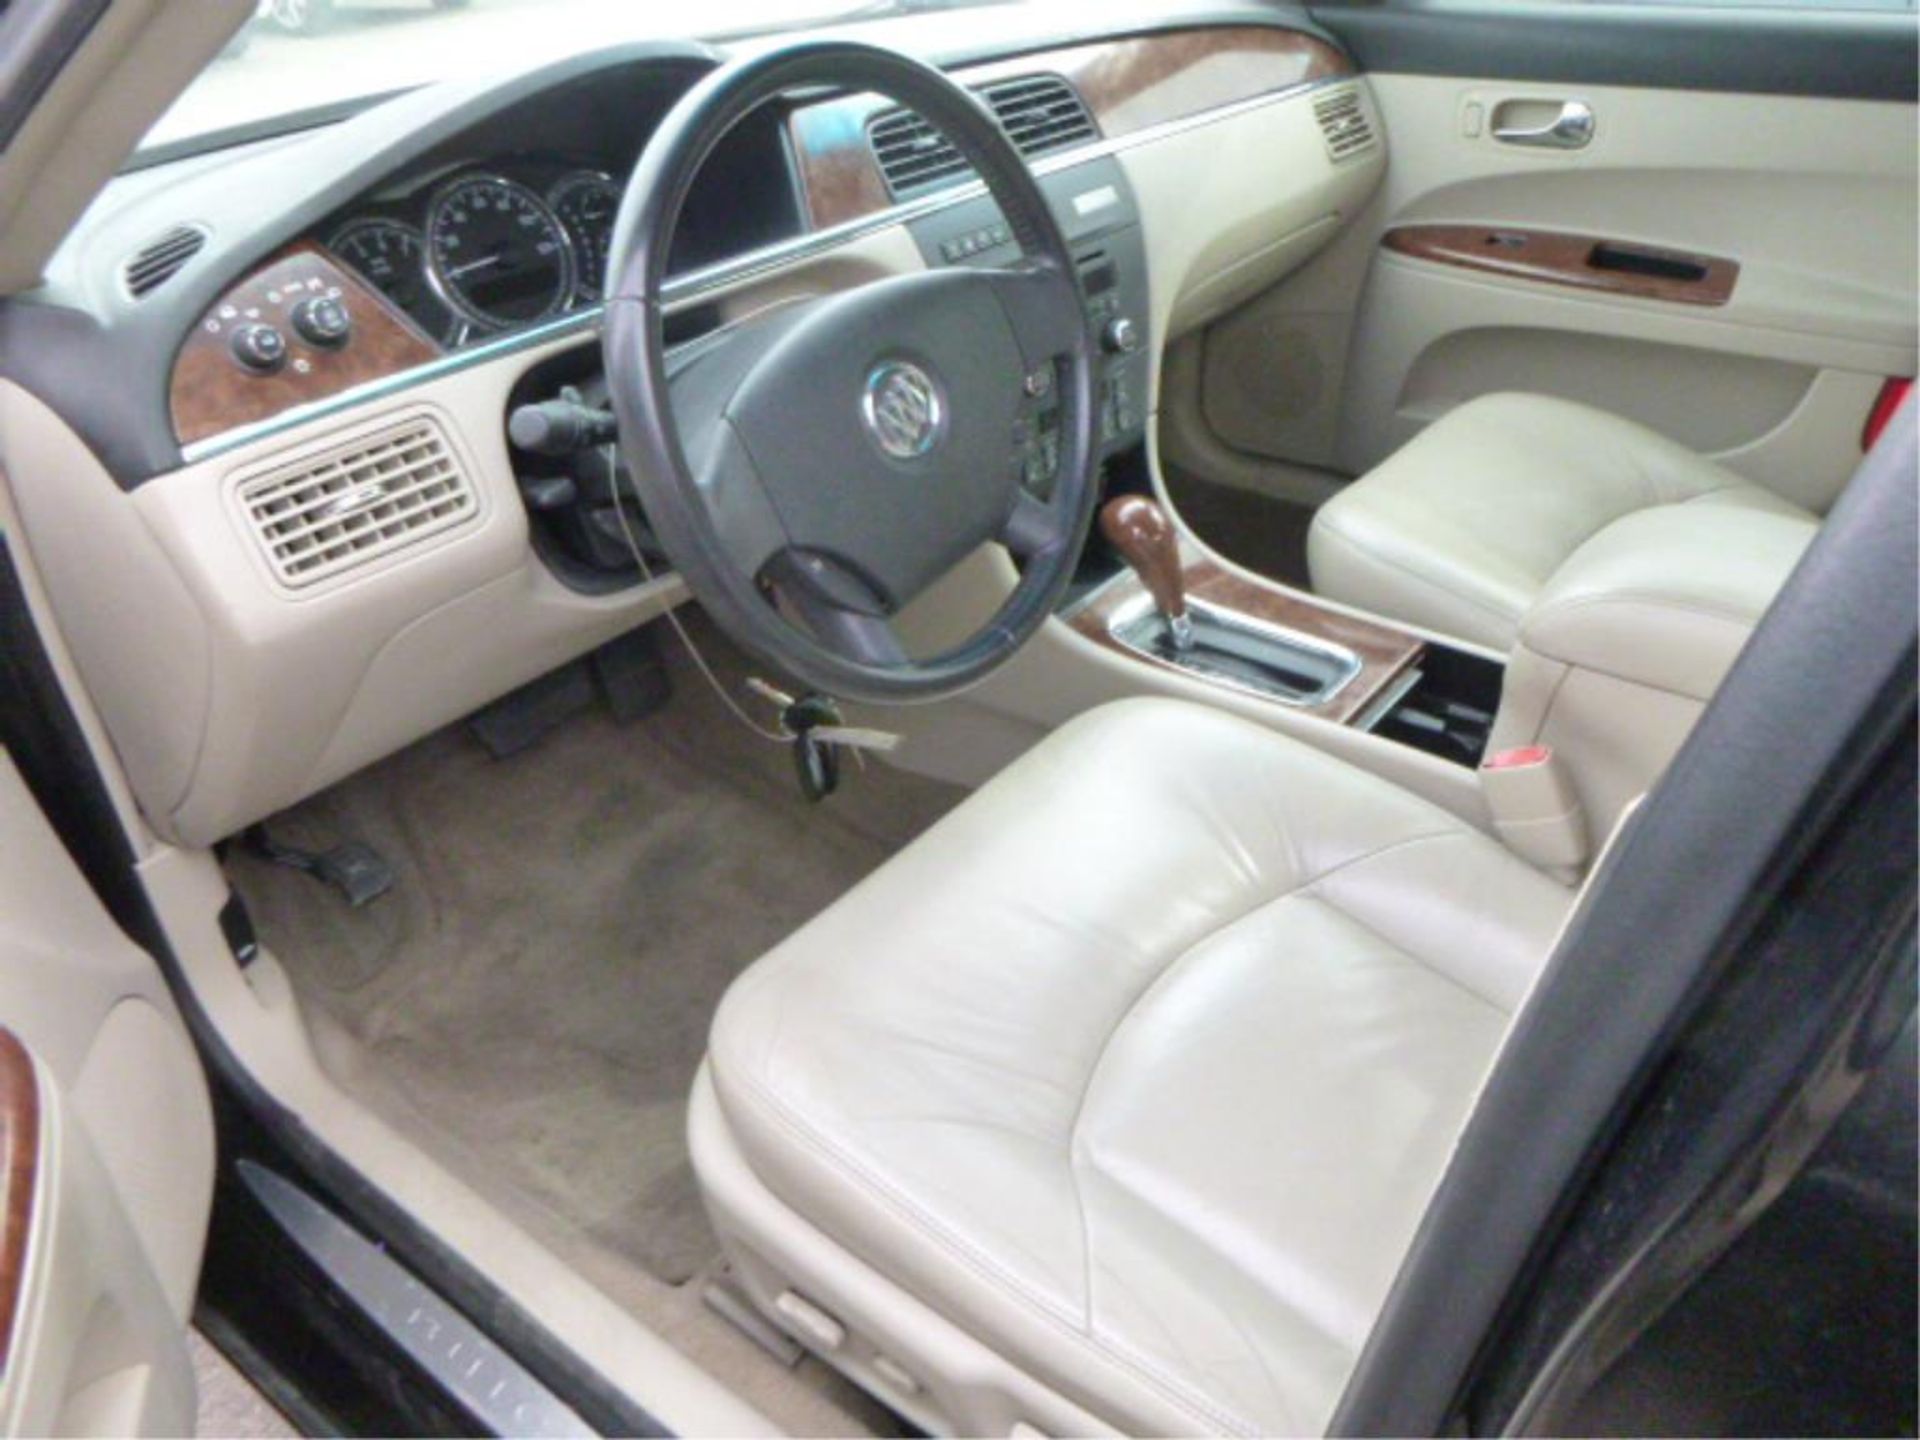 2005 Buick LaCrosse - Image 7 of 10